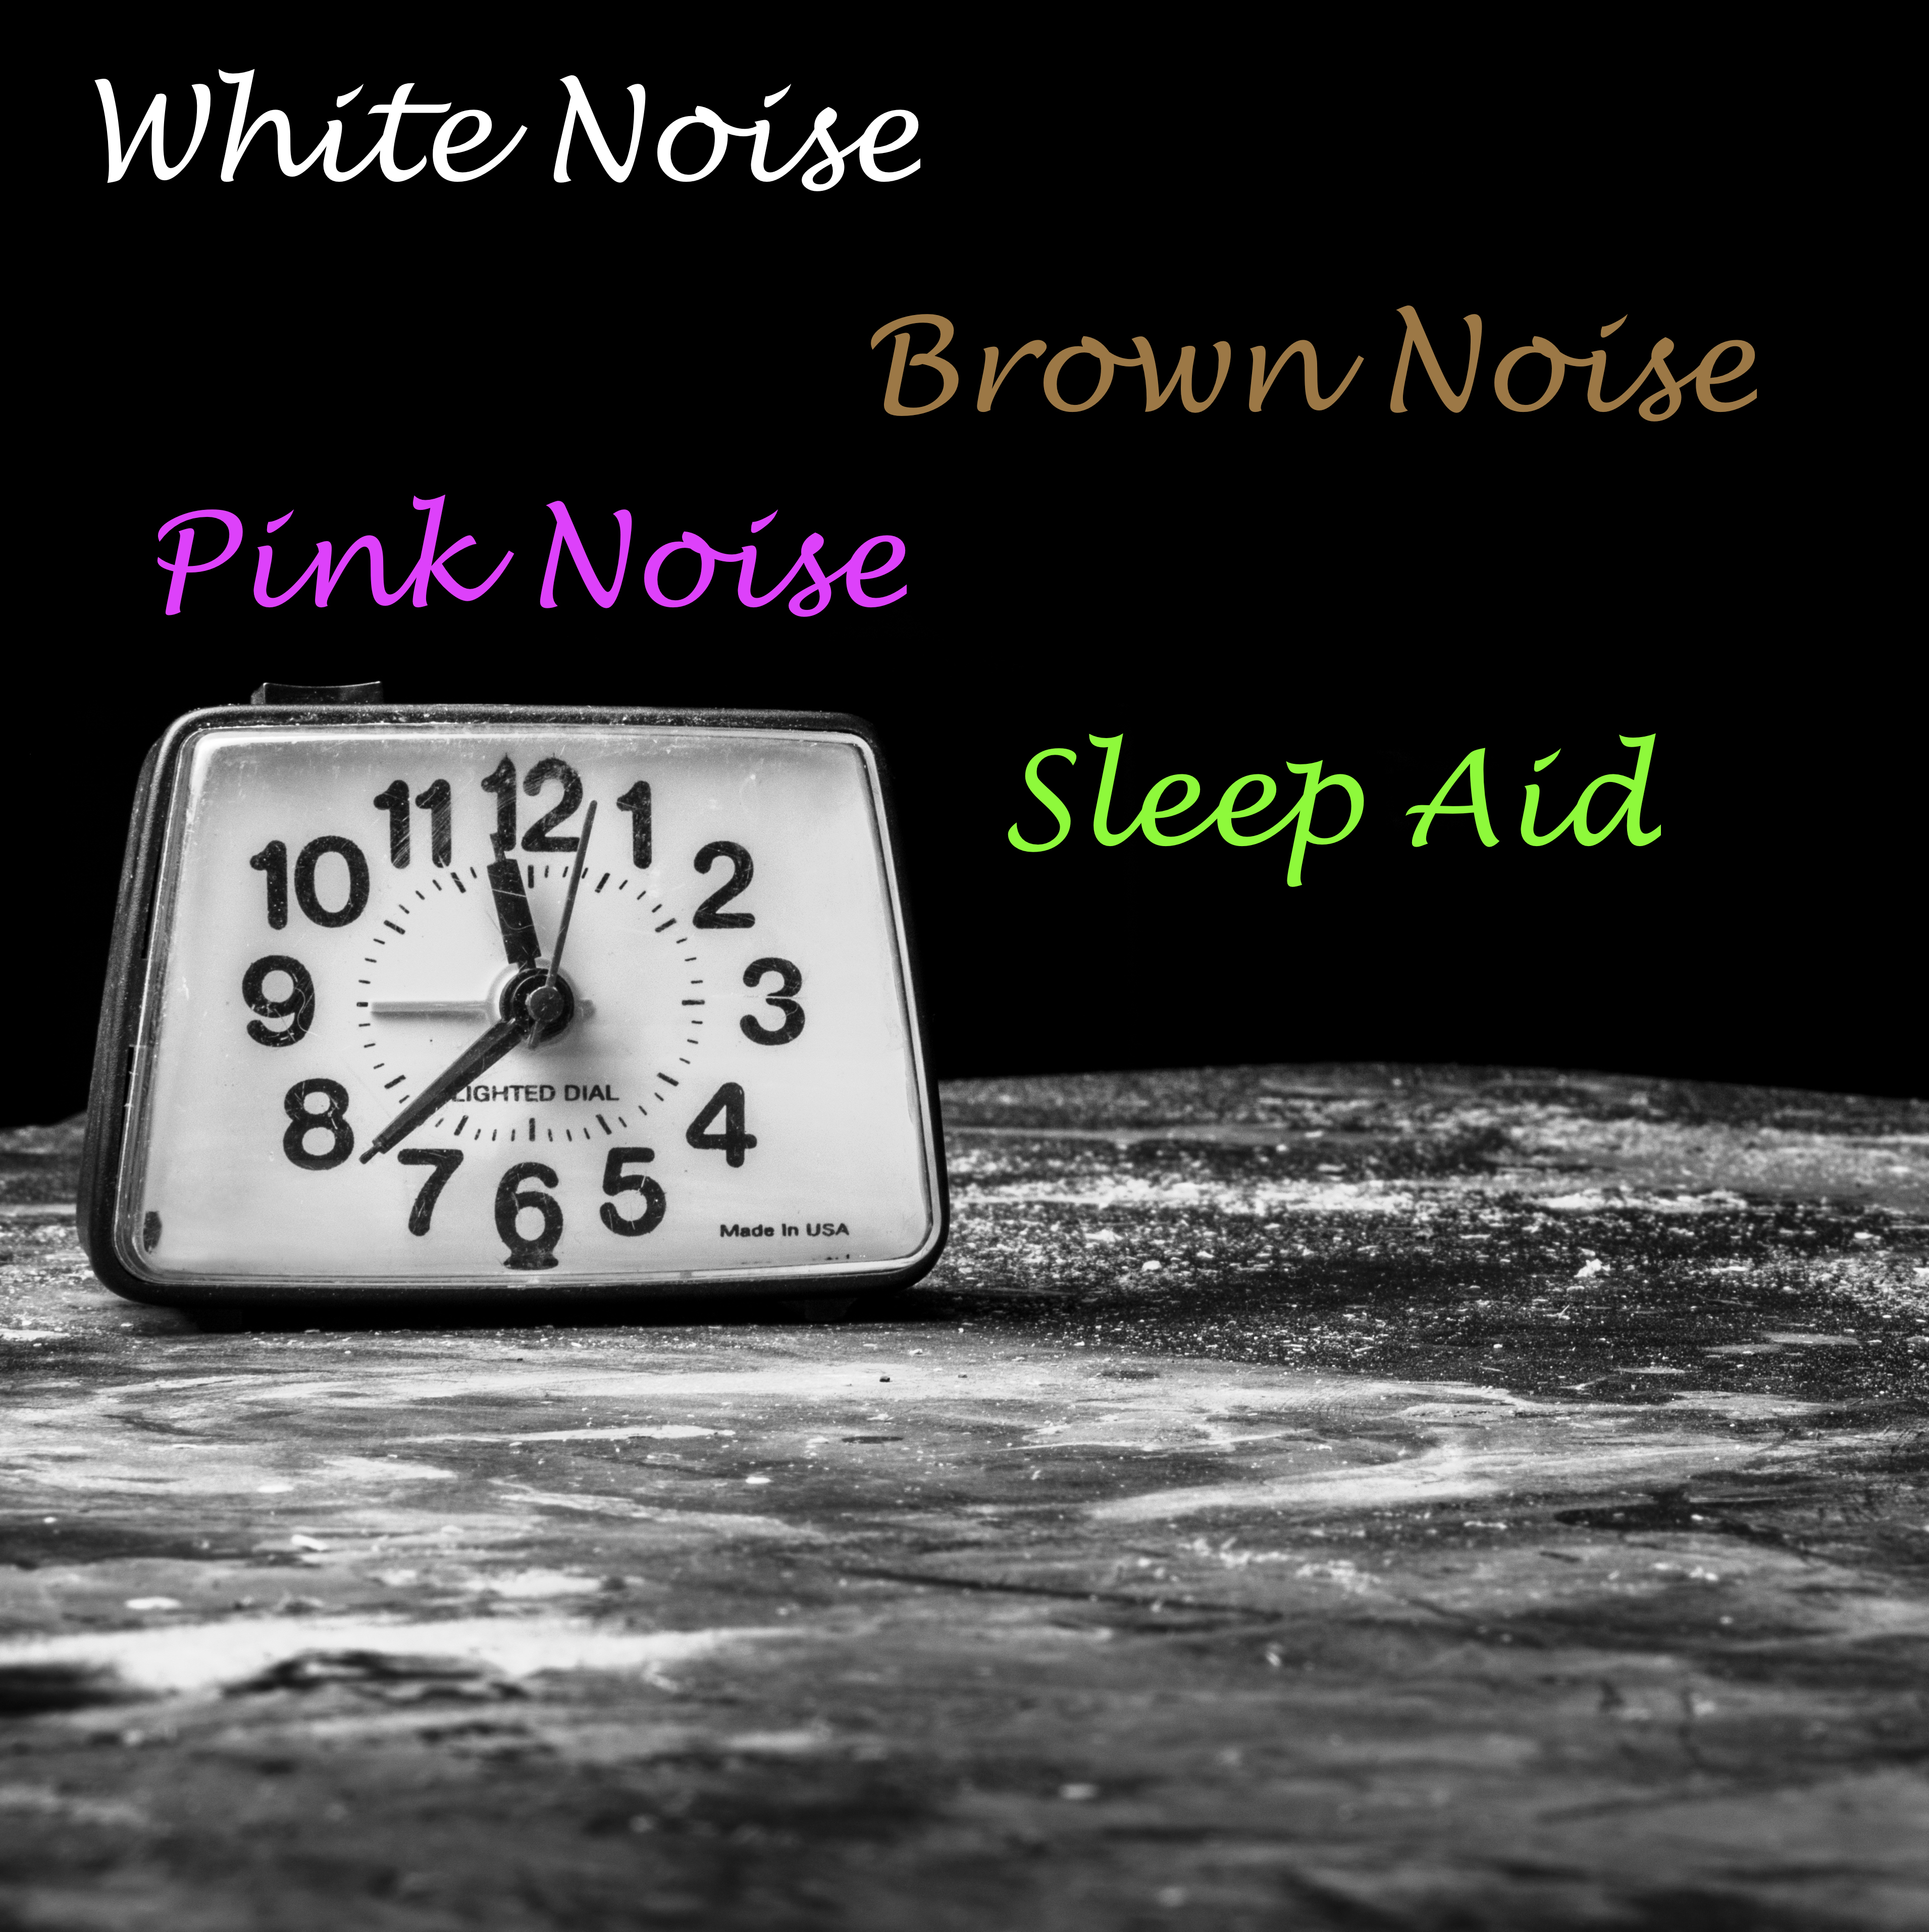 15 Loopable Pink Noise, White Noise and Brown Noise Tracks, Natural Sounds for Sleep Problems, Background Sleep Aid